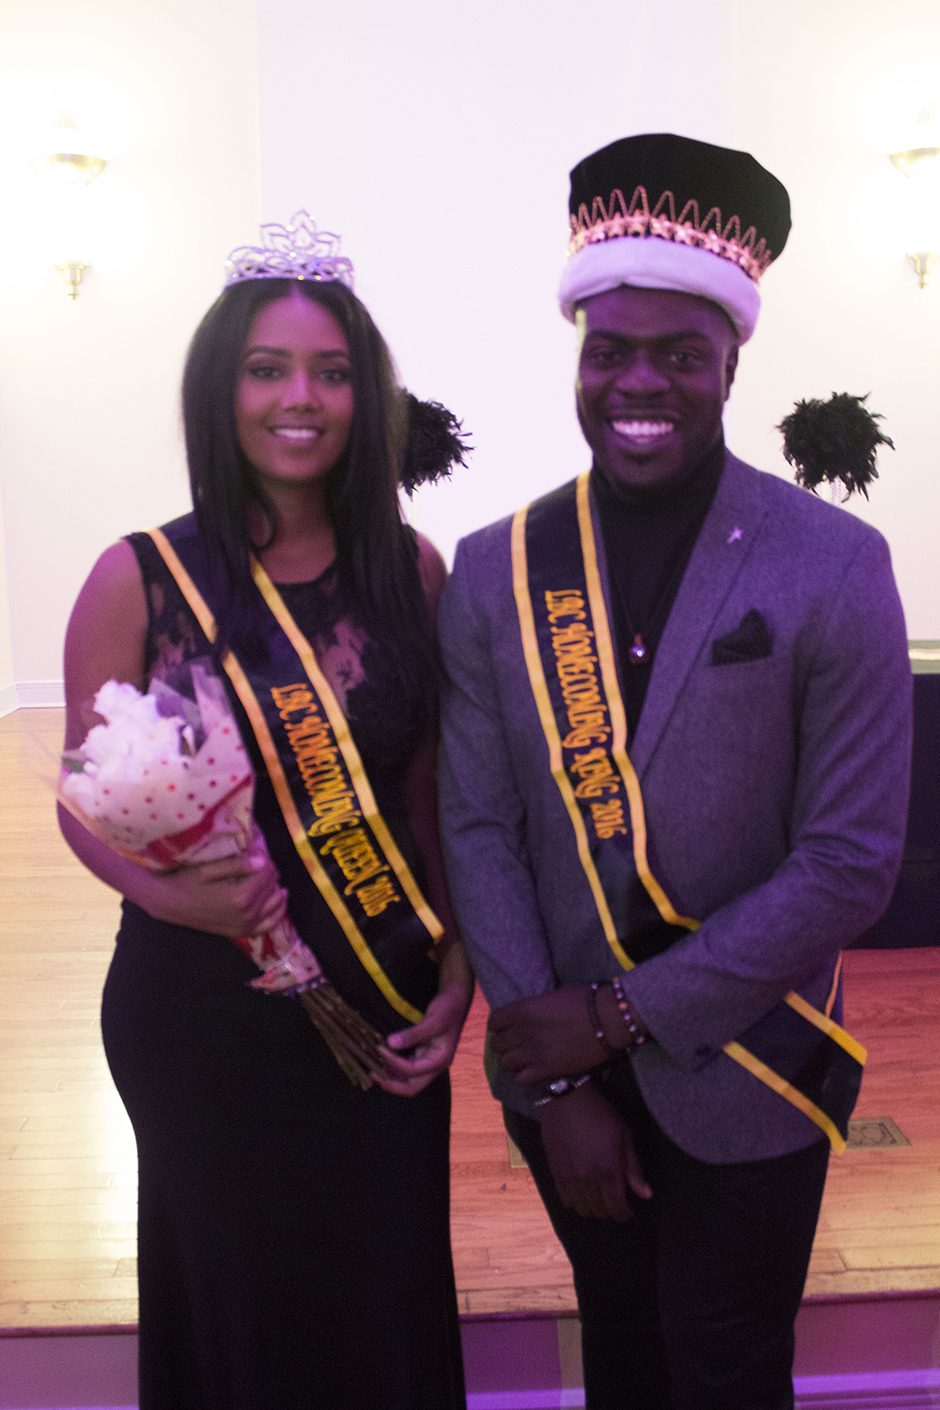 Seniors Maza Wole and Okey Ukaga are crowned this year’s LBC Homecoming King and Queen. Photo by Ymani Wince